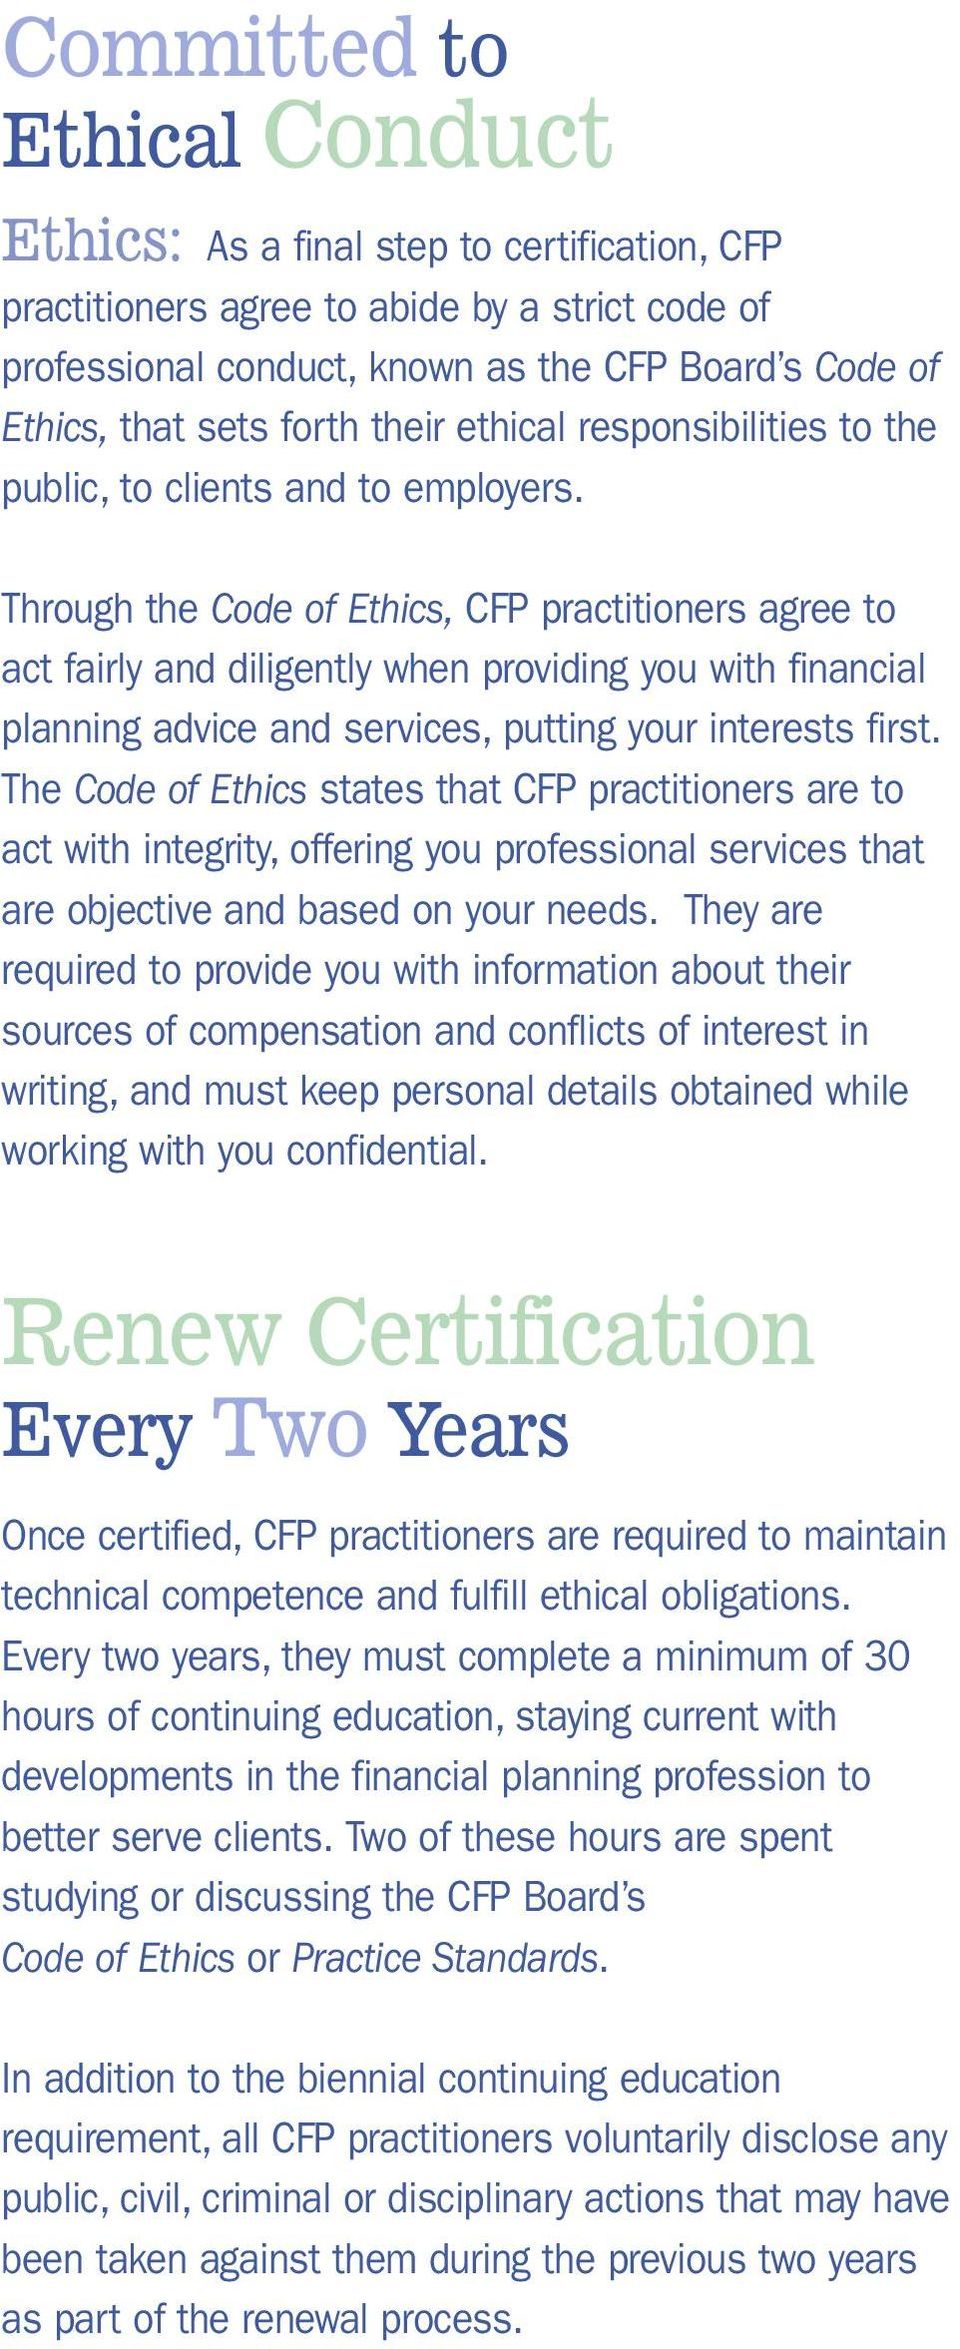 Through the Code of Ethics, CFP practitioners agree to act fairly and diligently when providing you with financial planning advice and services, putting your interests first.